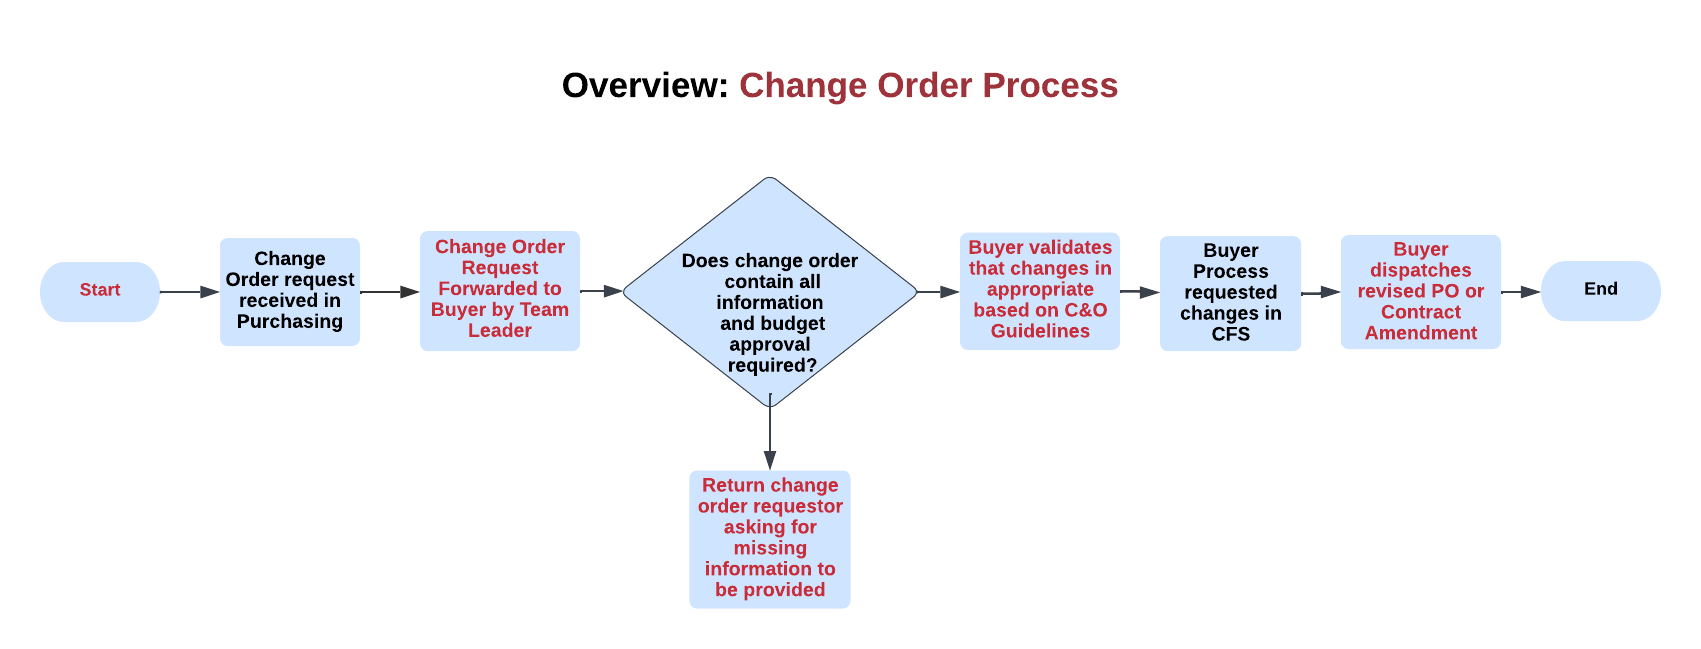 overview-change-order-process.png